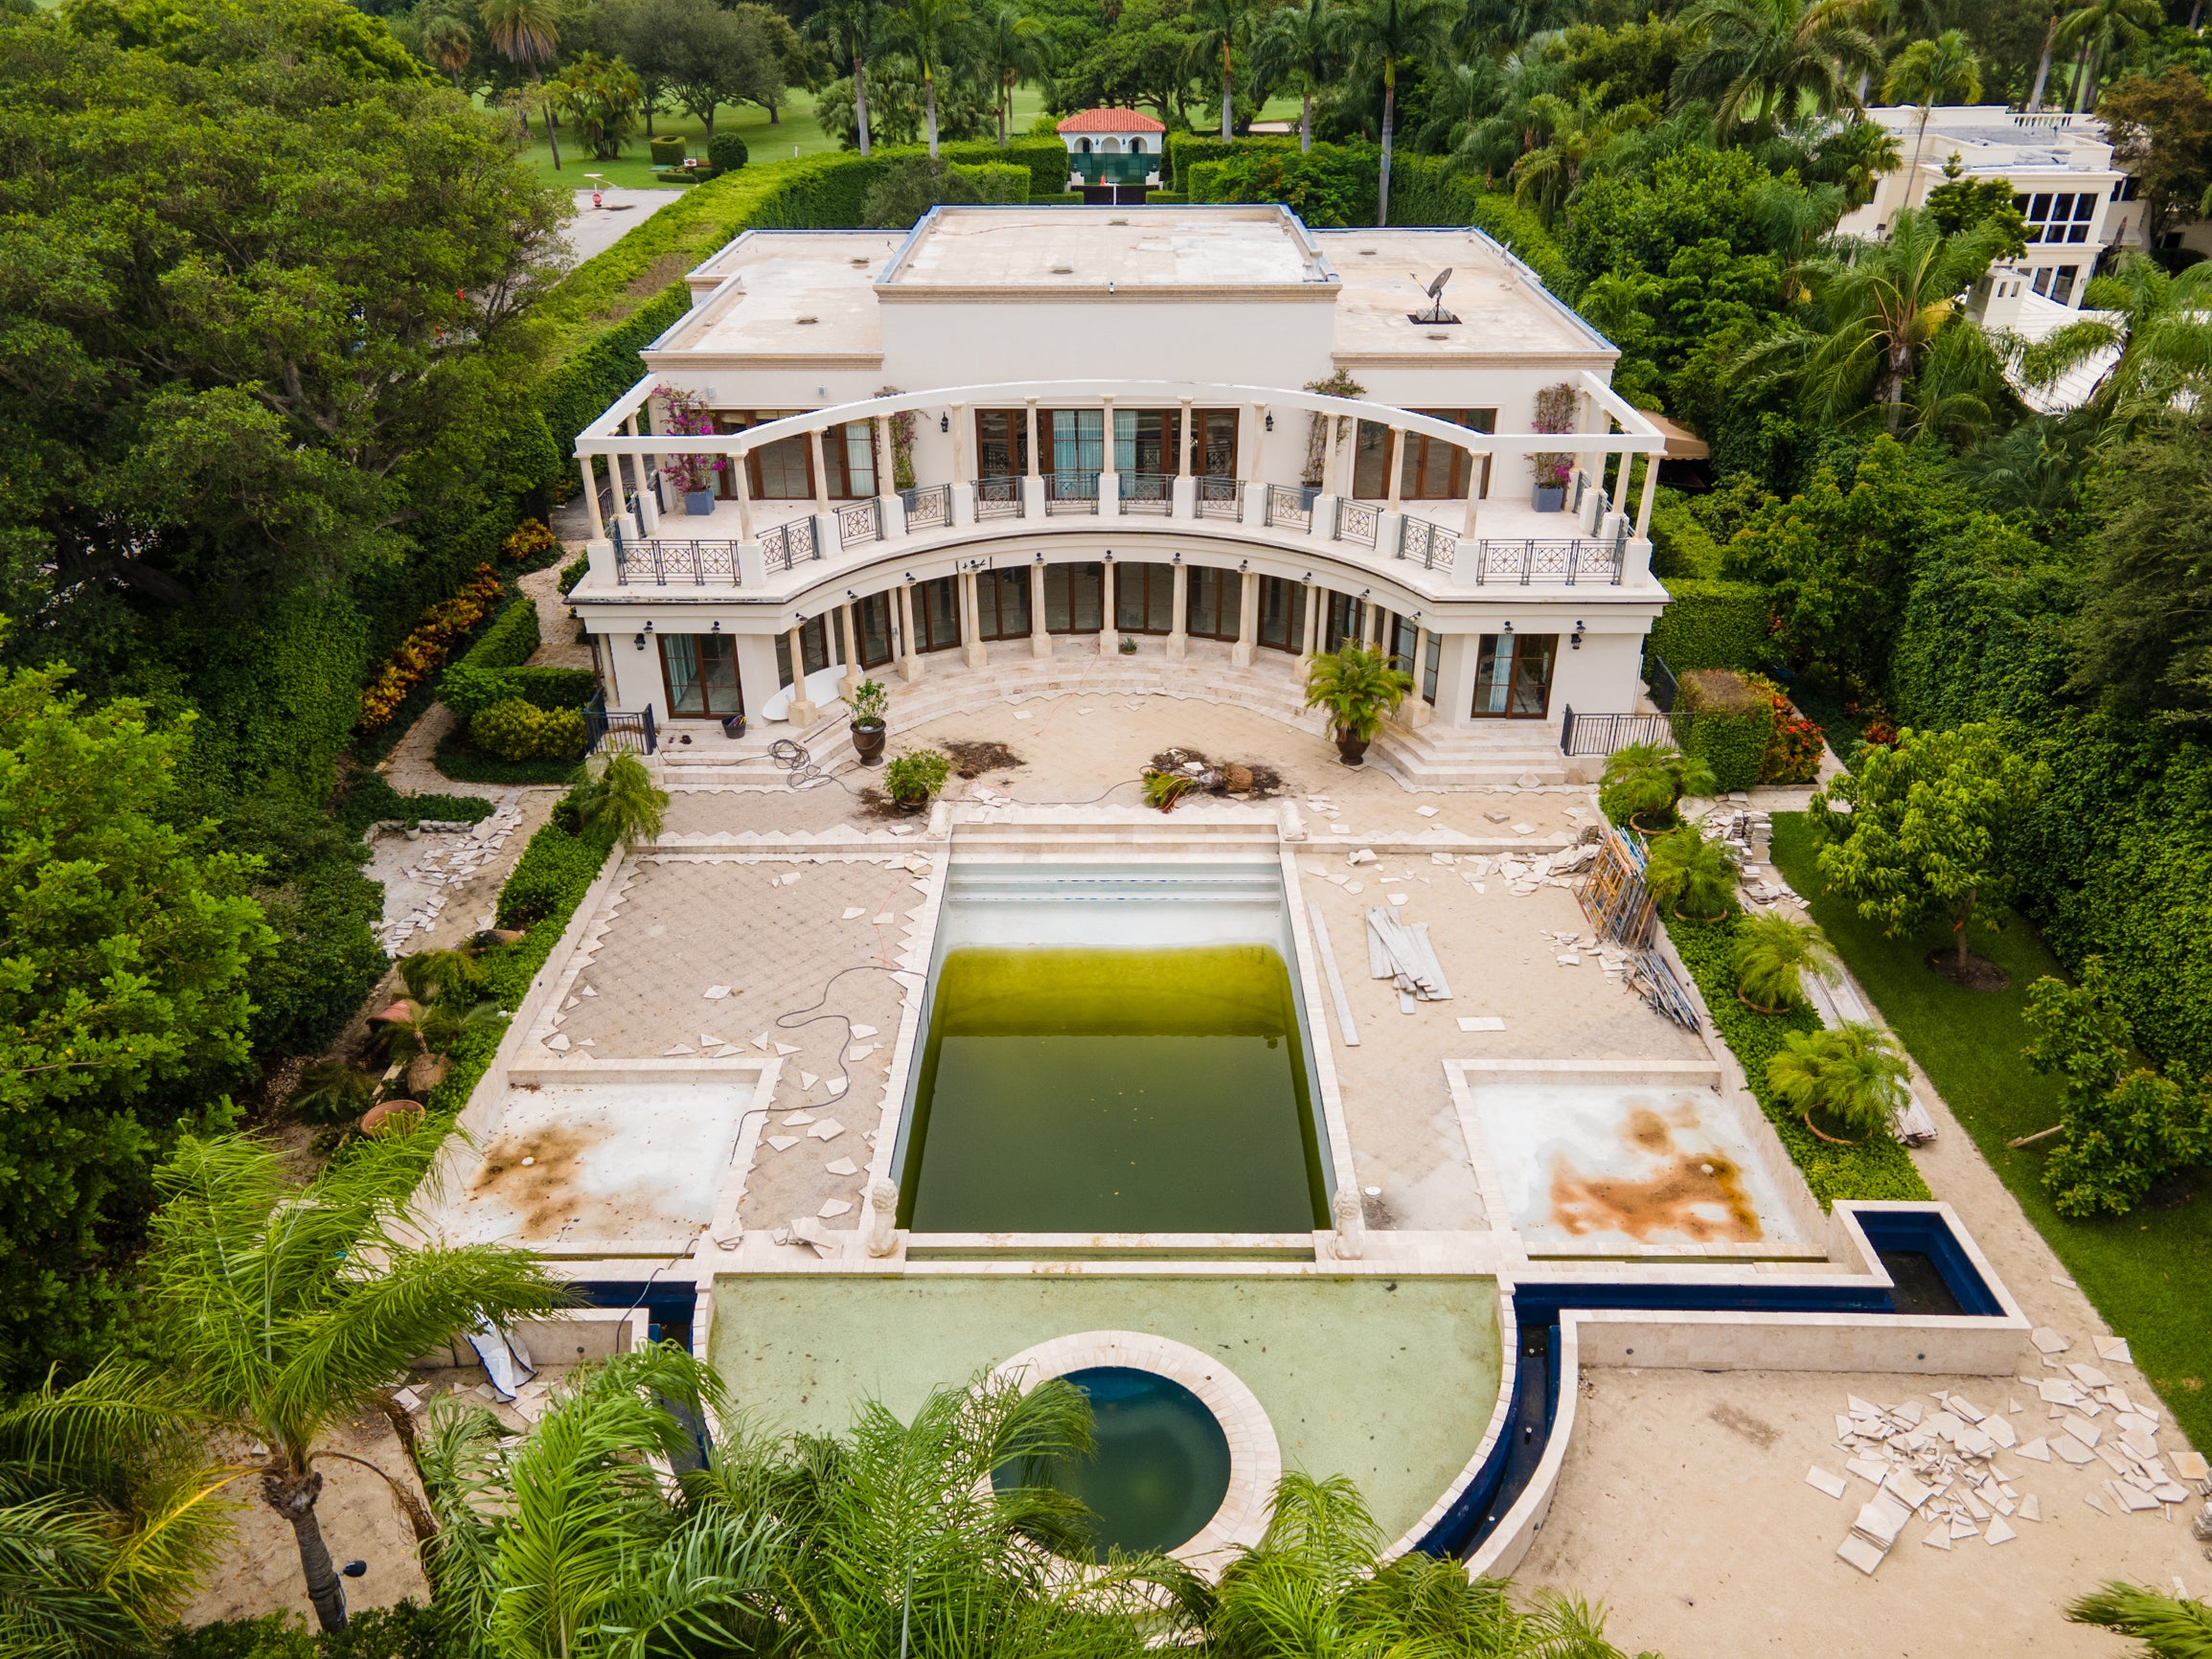 Aerials show Ivanka Trump And Jared Kushner's new $24 million Miami Beach mega mansion which looks to be in need of some TLC